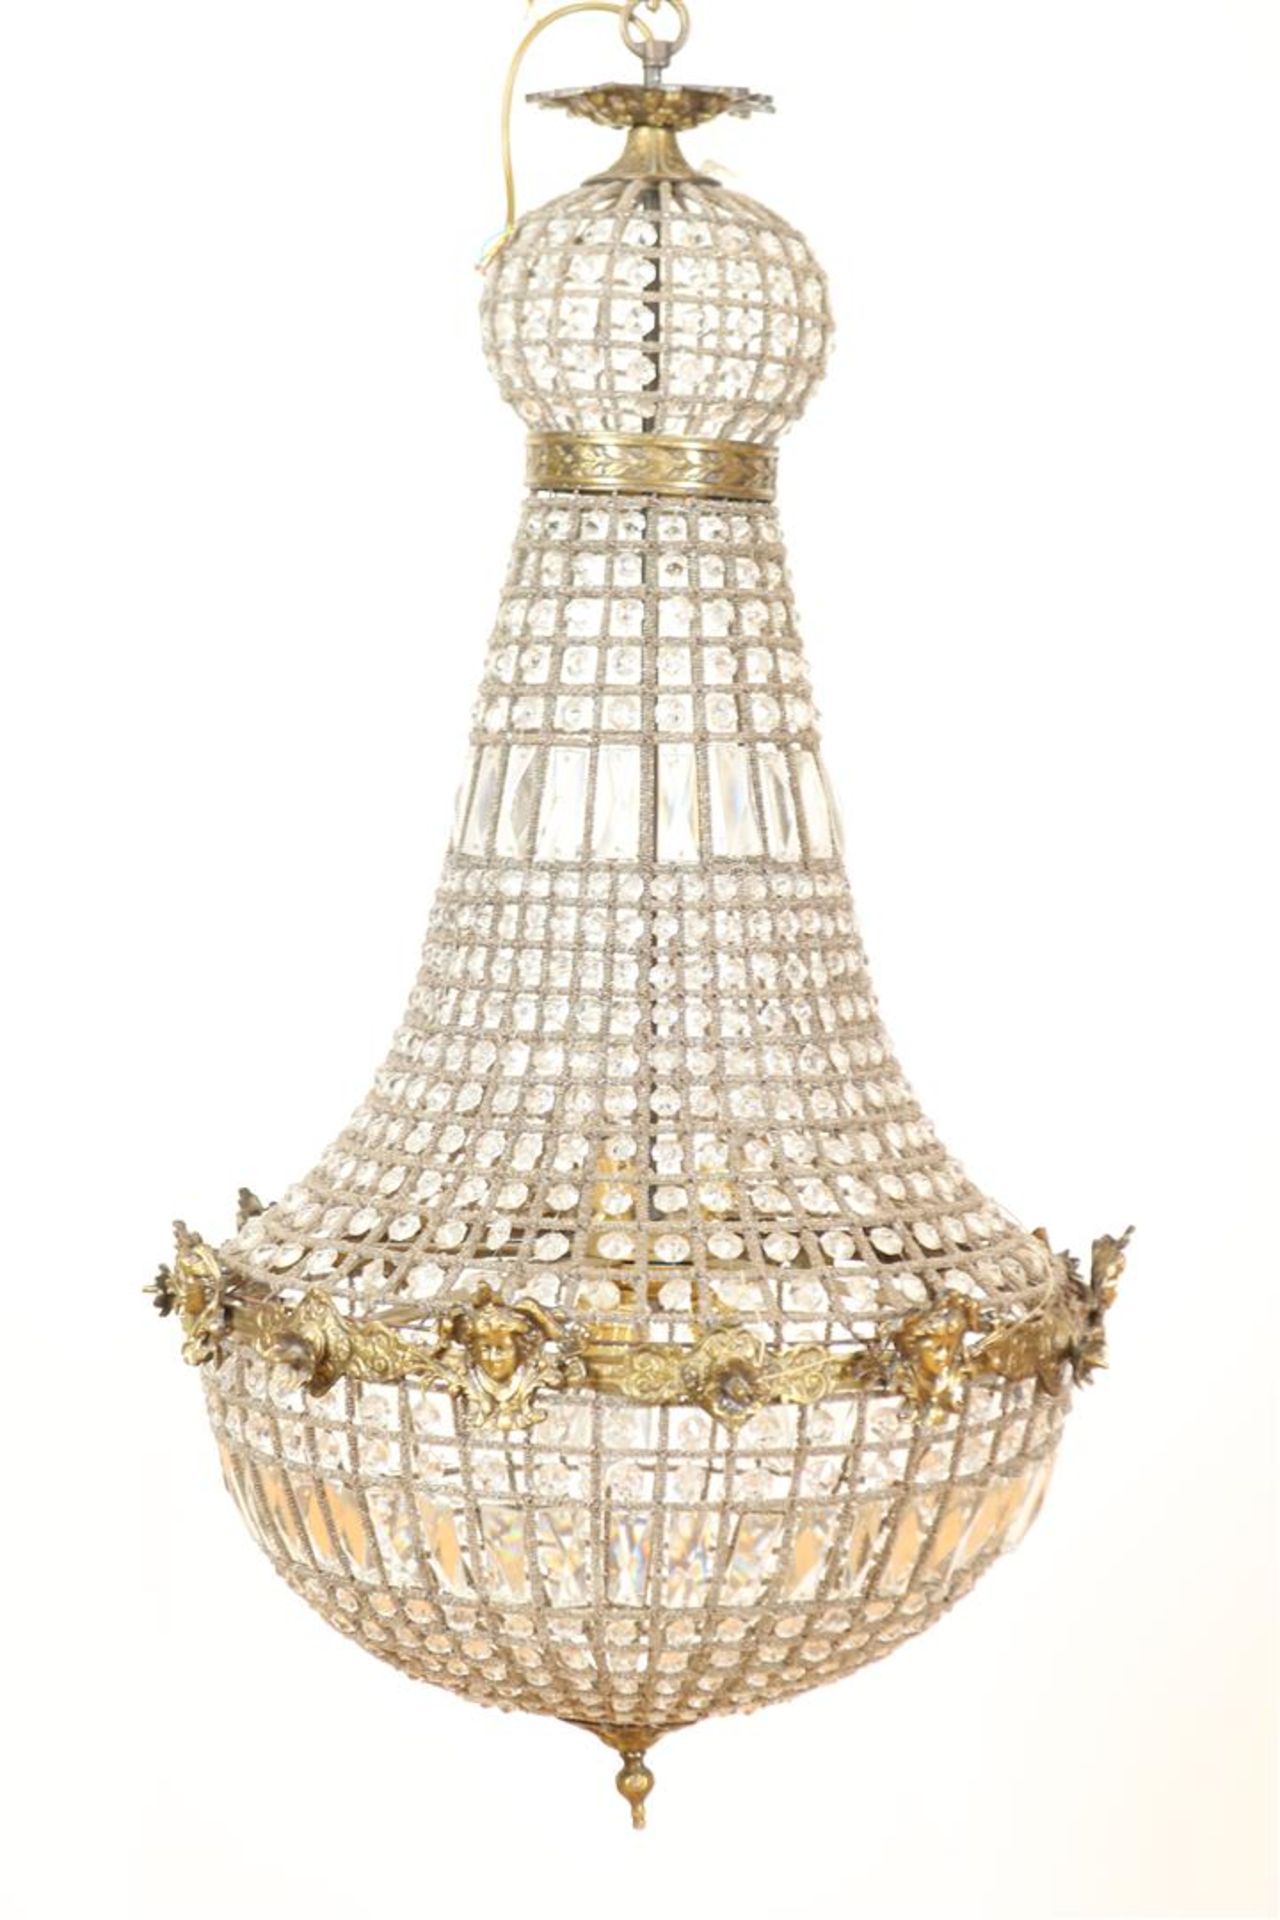 Bronze 6-light pocket crown with maskons and glass beads, h. 100 cm.